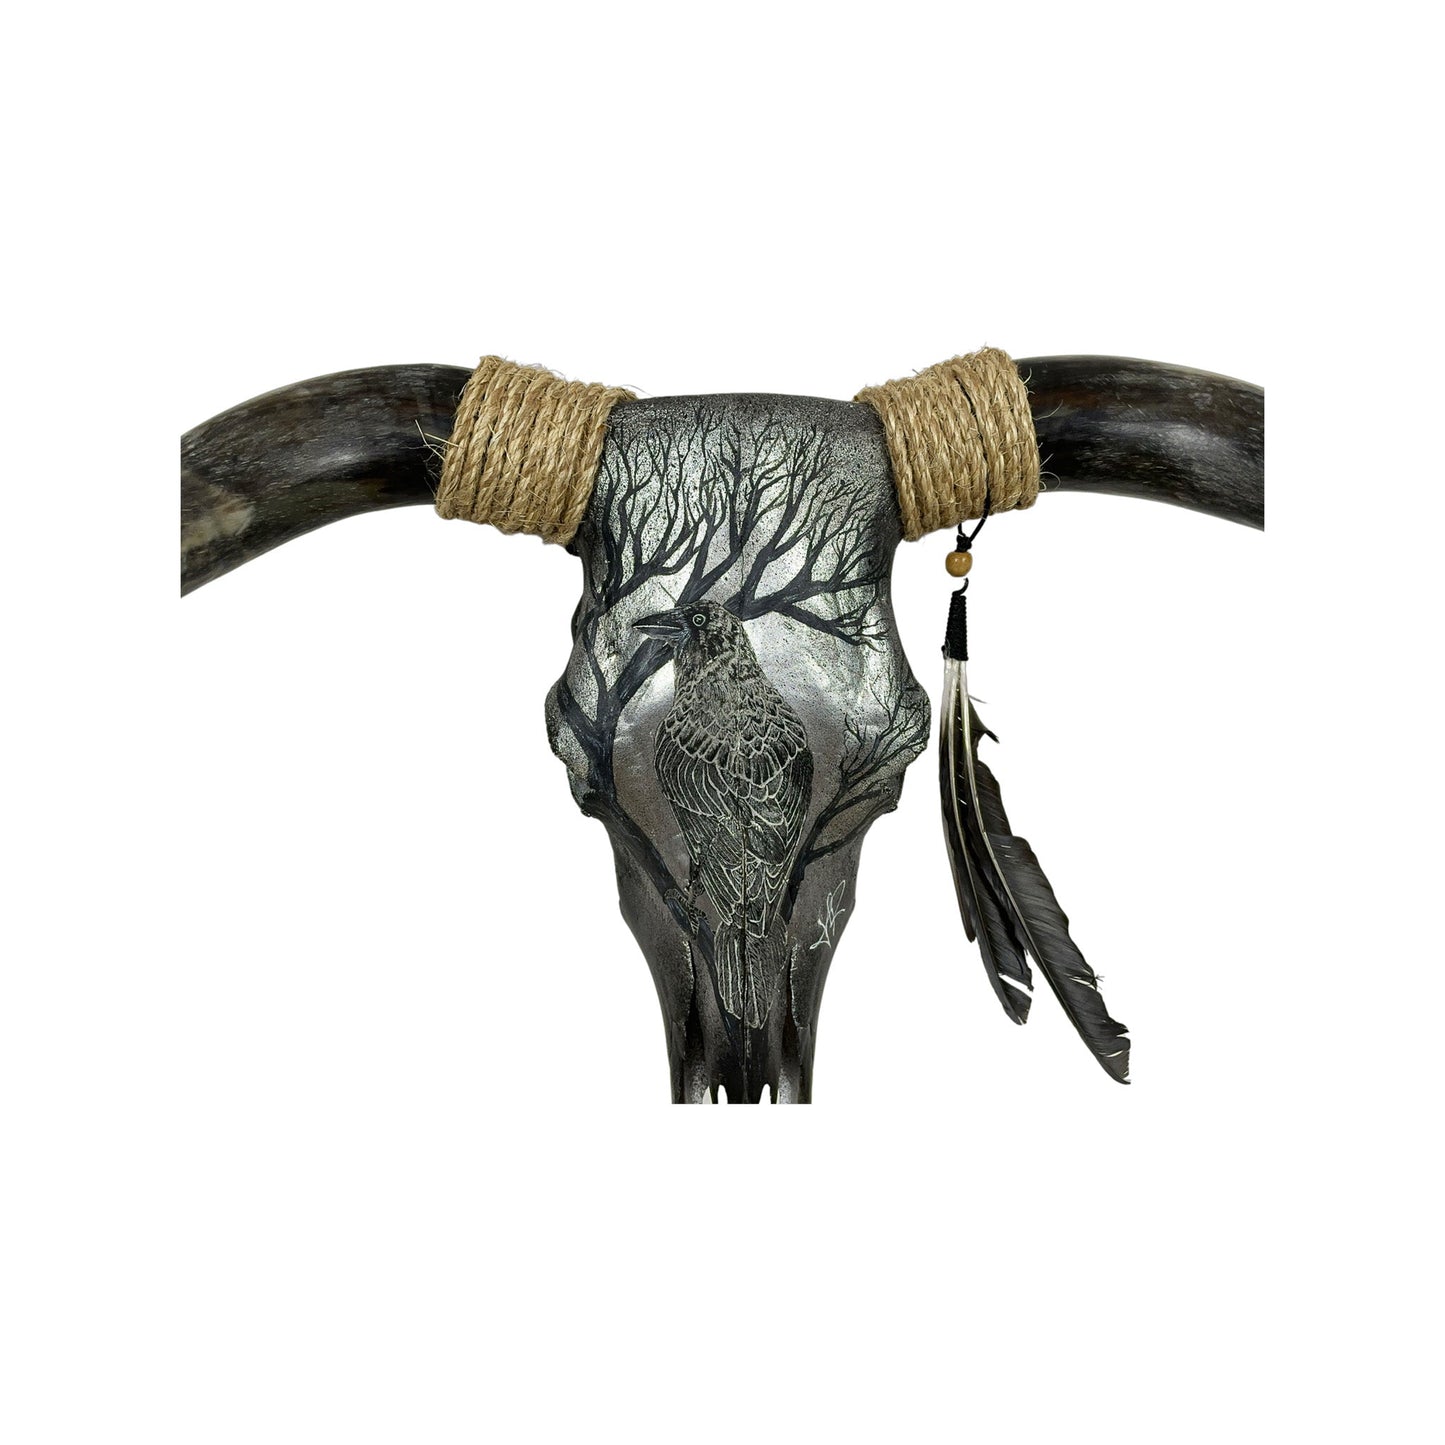 A Bull Engraved Skull Taxidermy Wall Decor featuring a crow perched on a tree